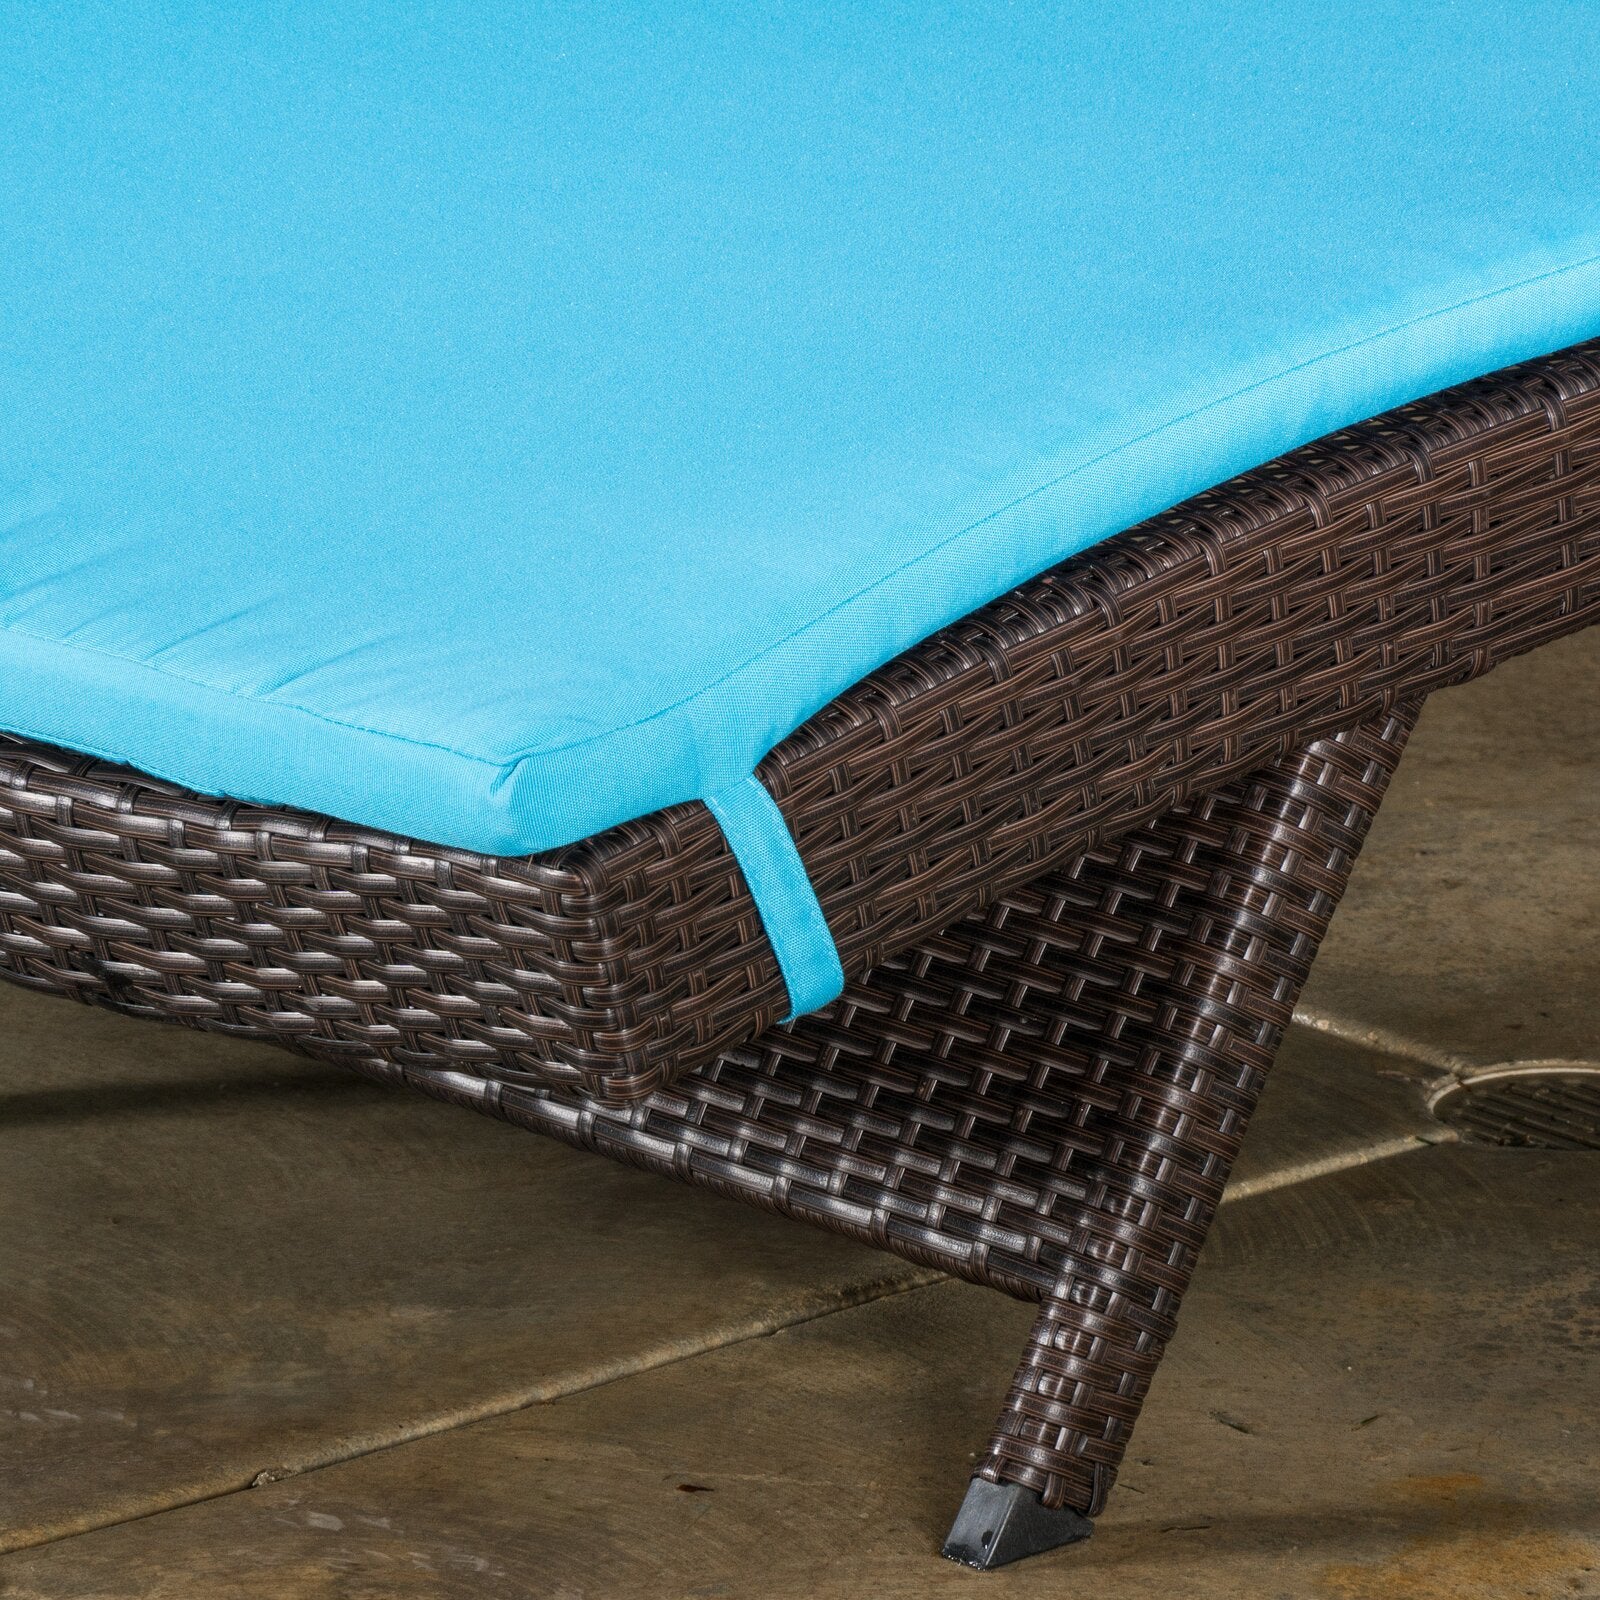 Outdoor Seat/Back Cushion PC205